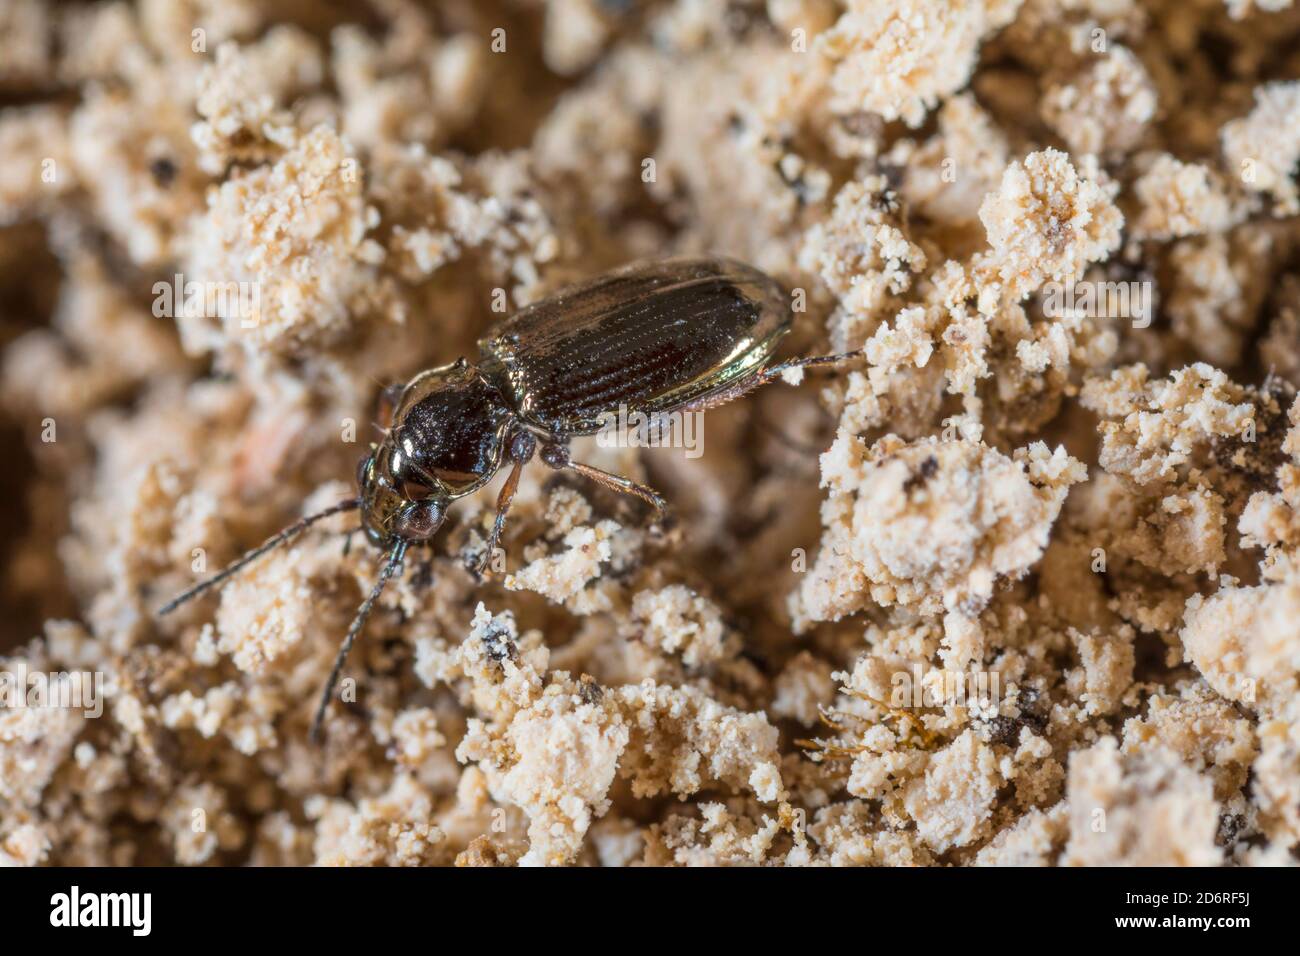 Ground beetle (Bembidion properans), on lichens, Germany Stock Photo